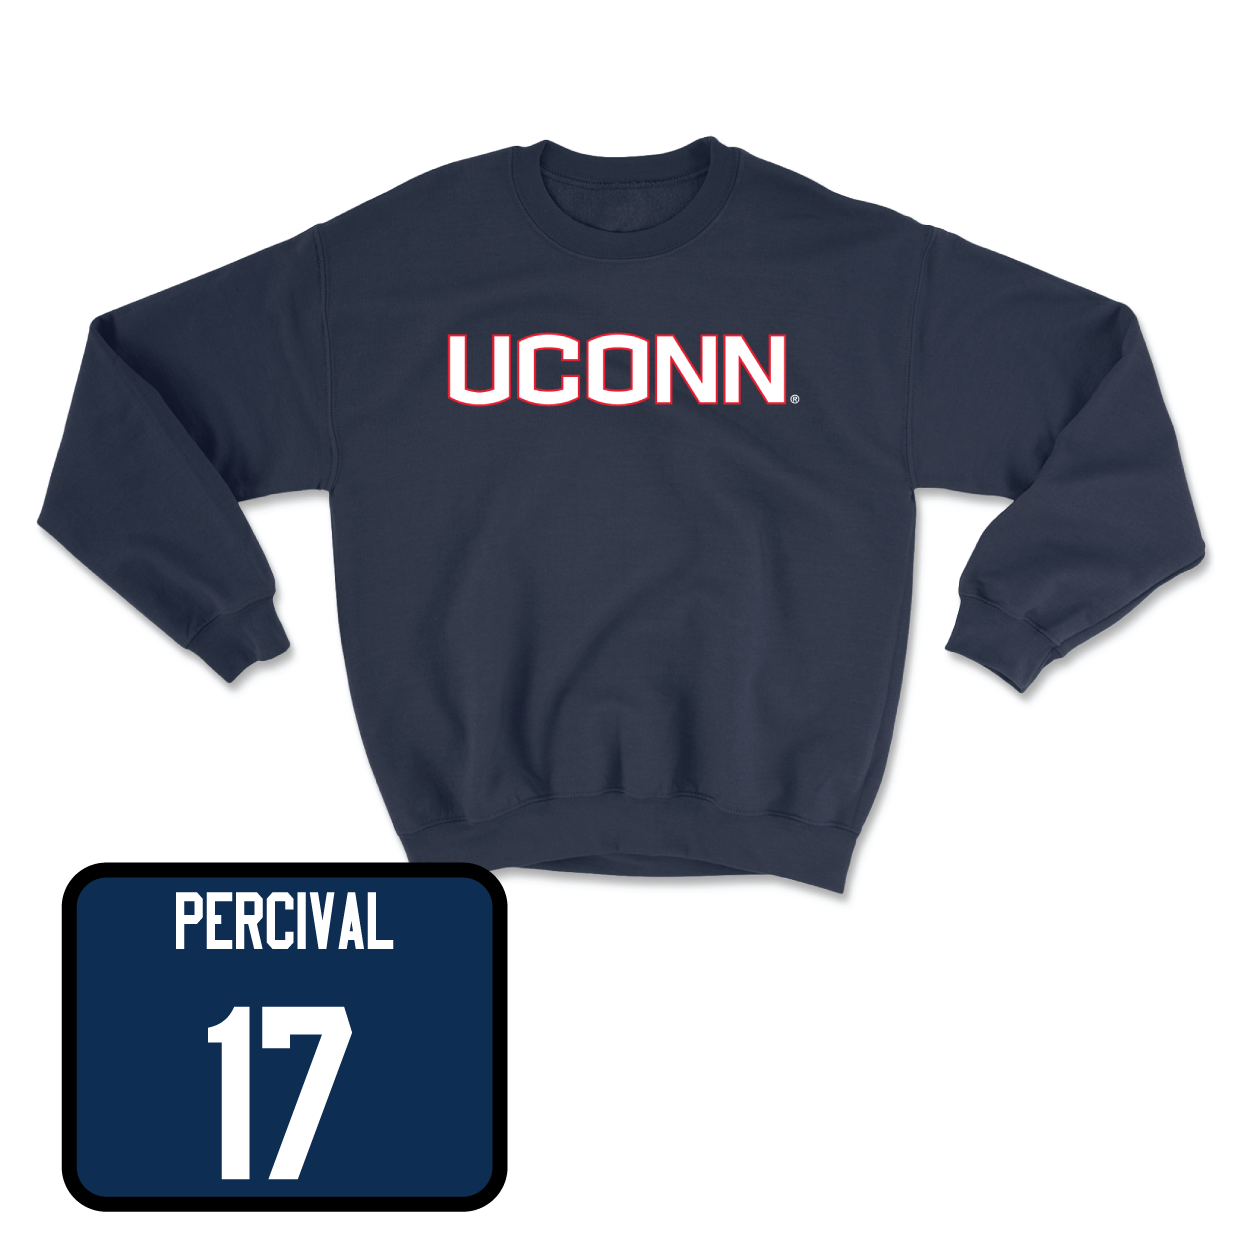 Navy Women's Volleyball UConn Crewneck Youth Medium / Jessica Perry | #11